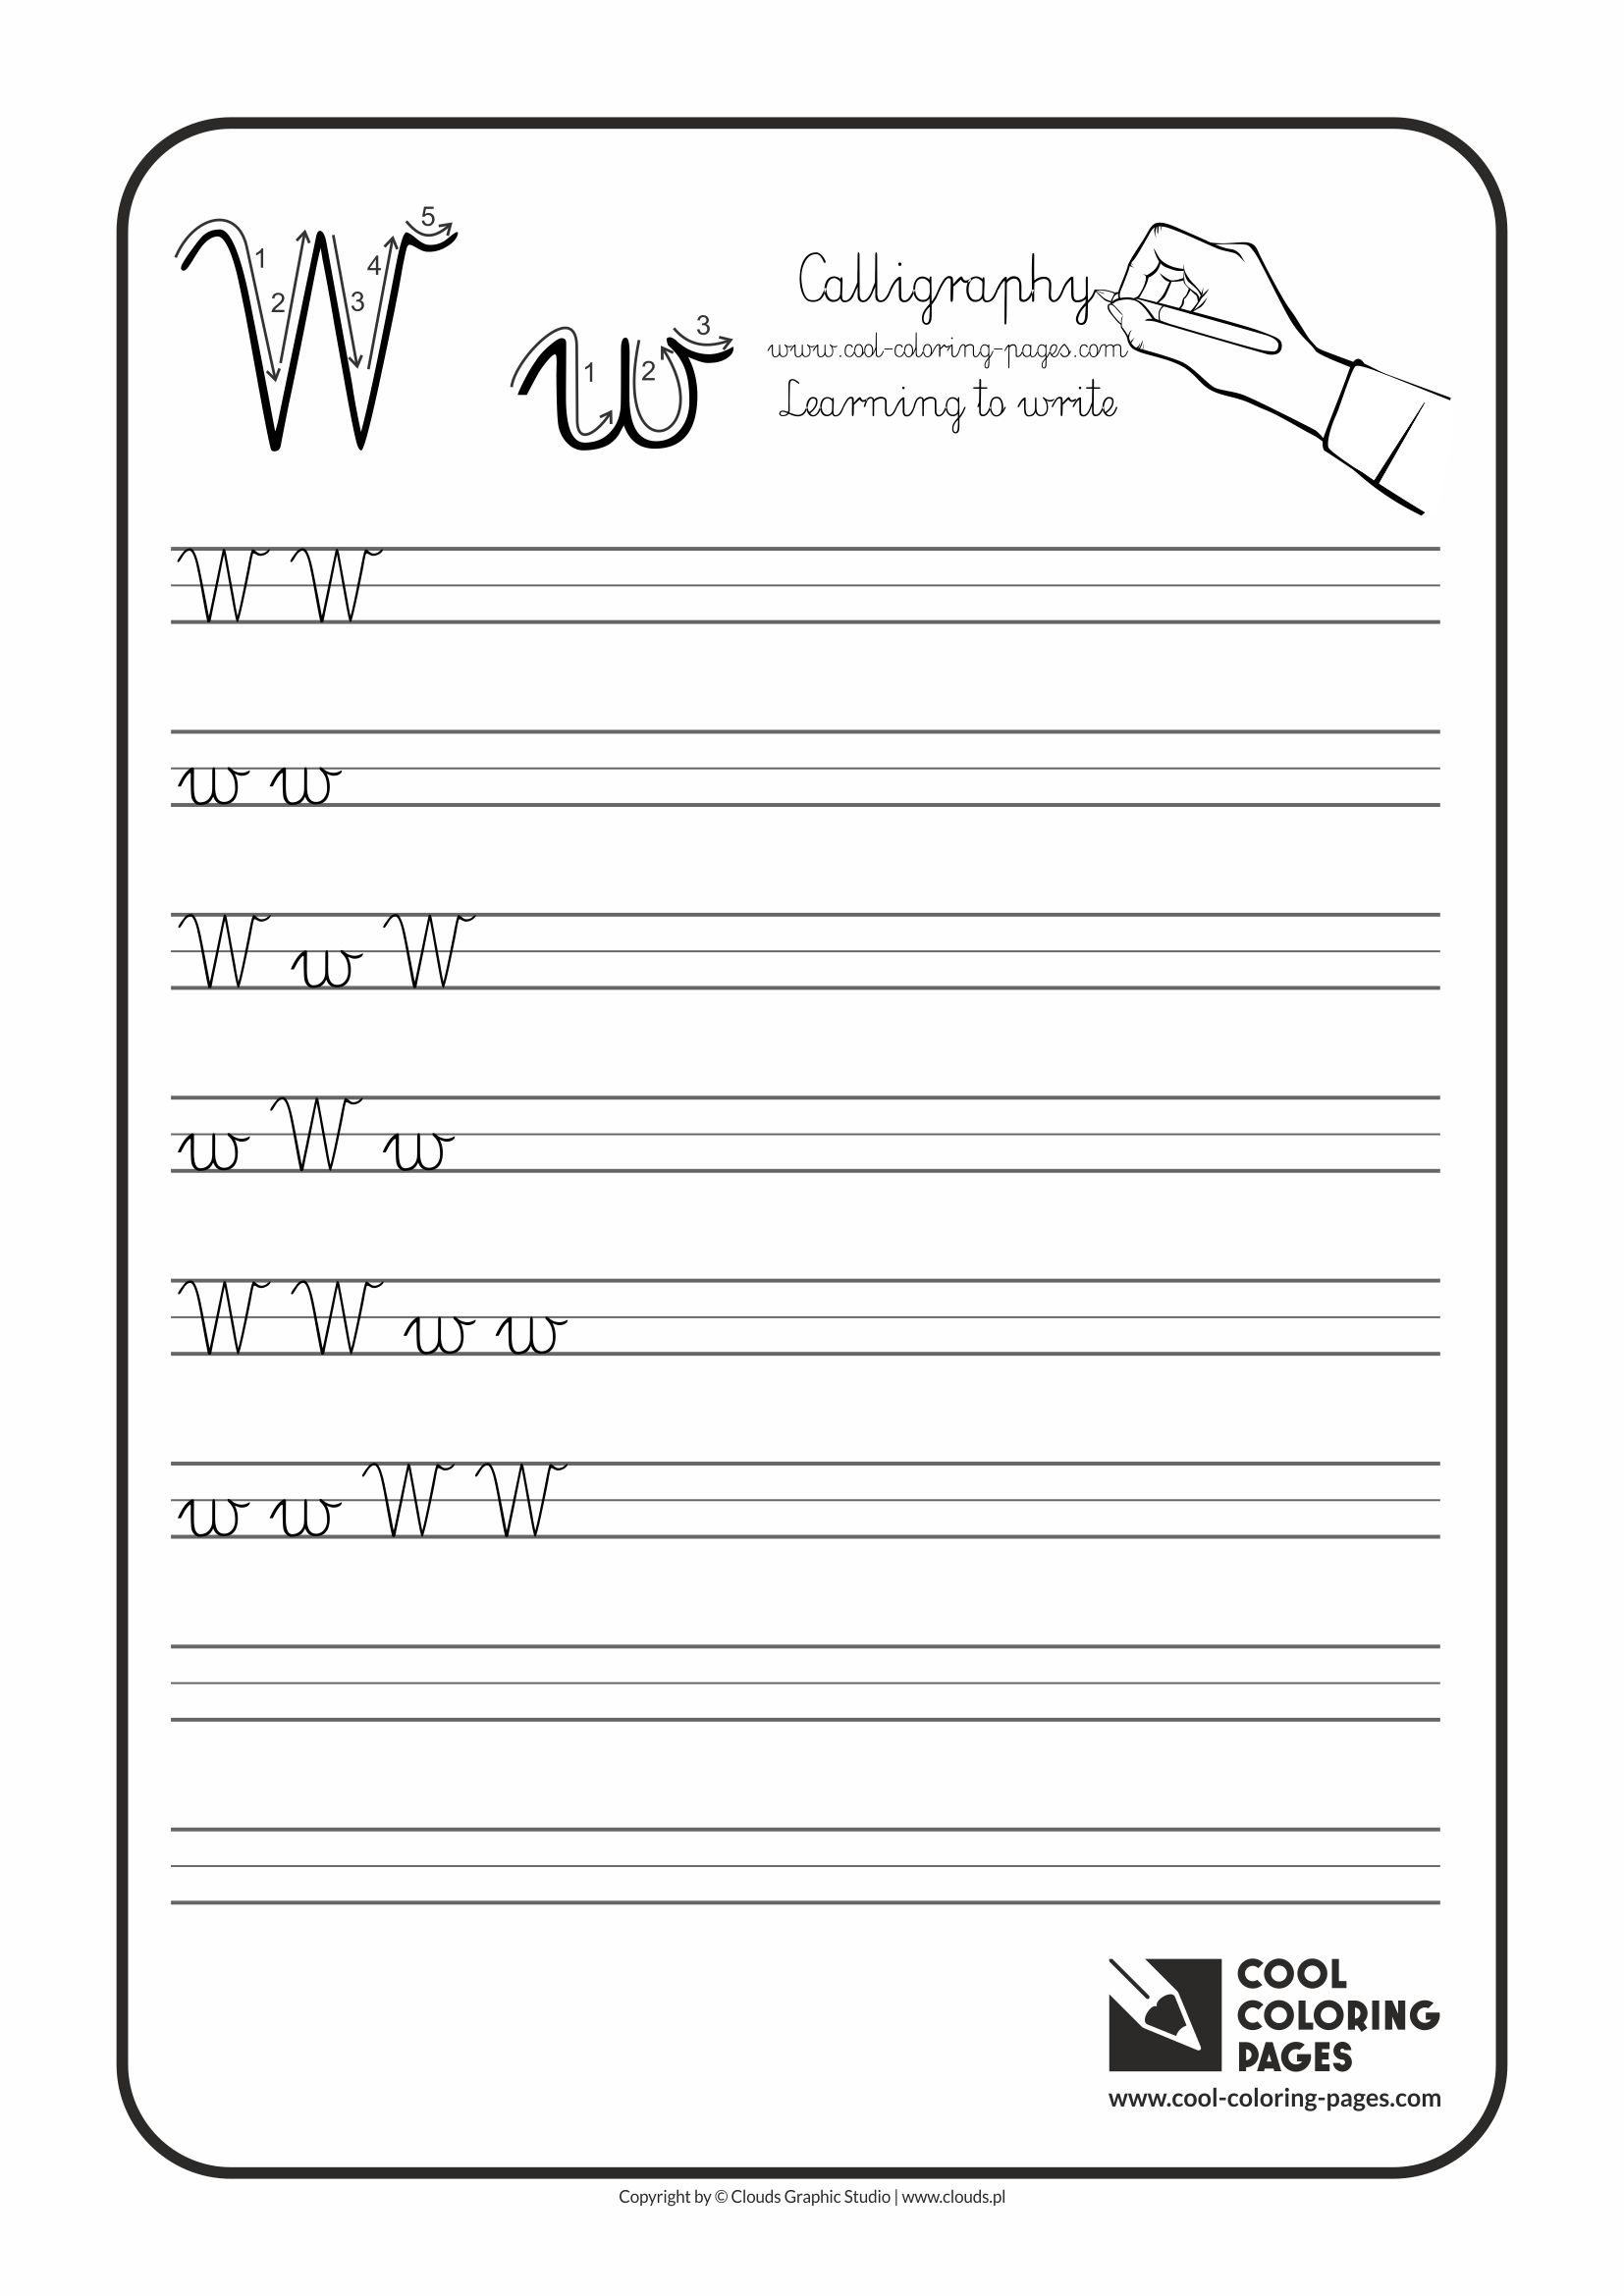 Letter Calligraphy Kids Cool Coloring Pages Handwriting Worksheets Alphabet